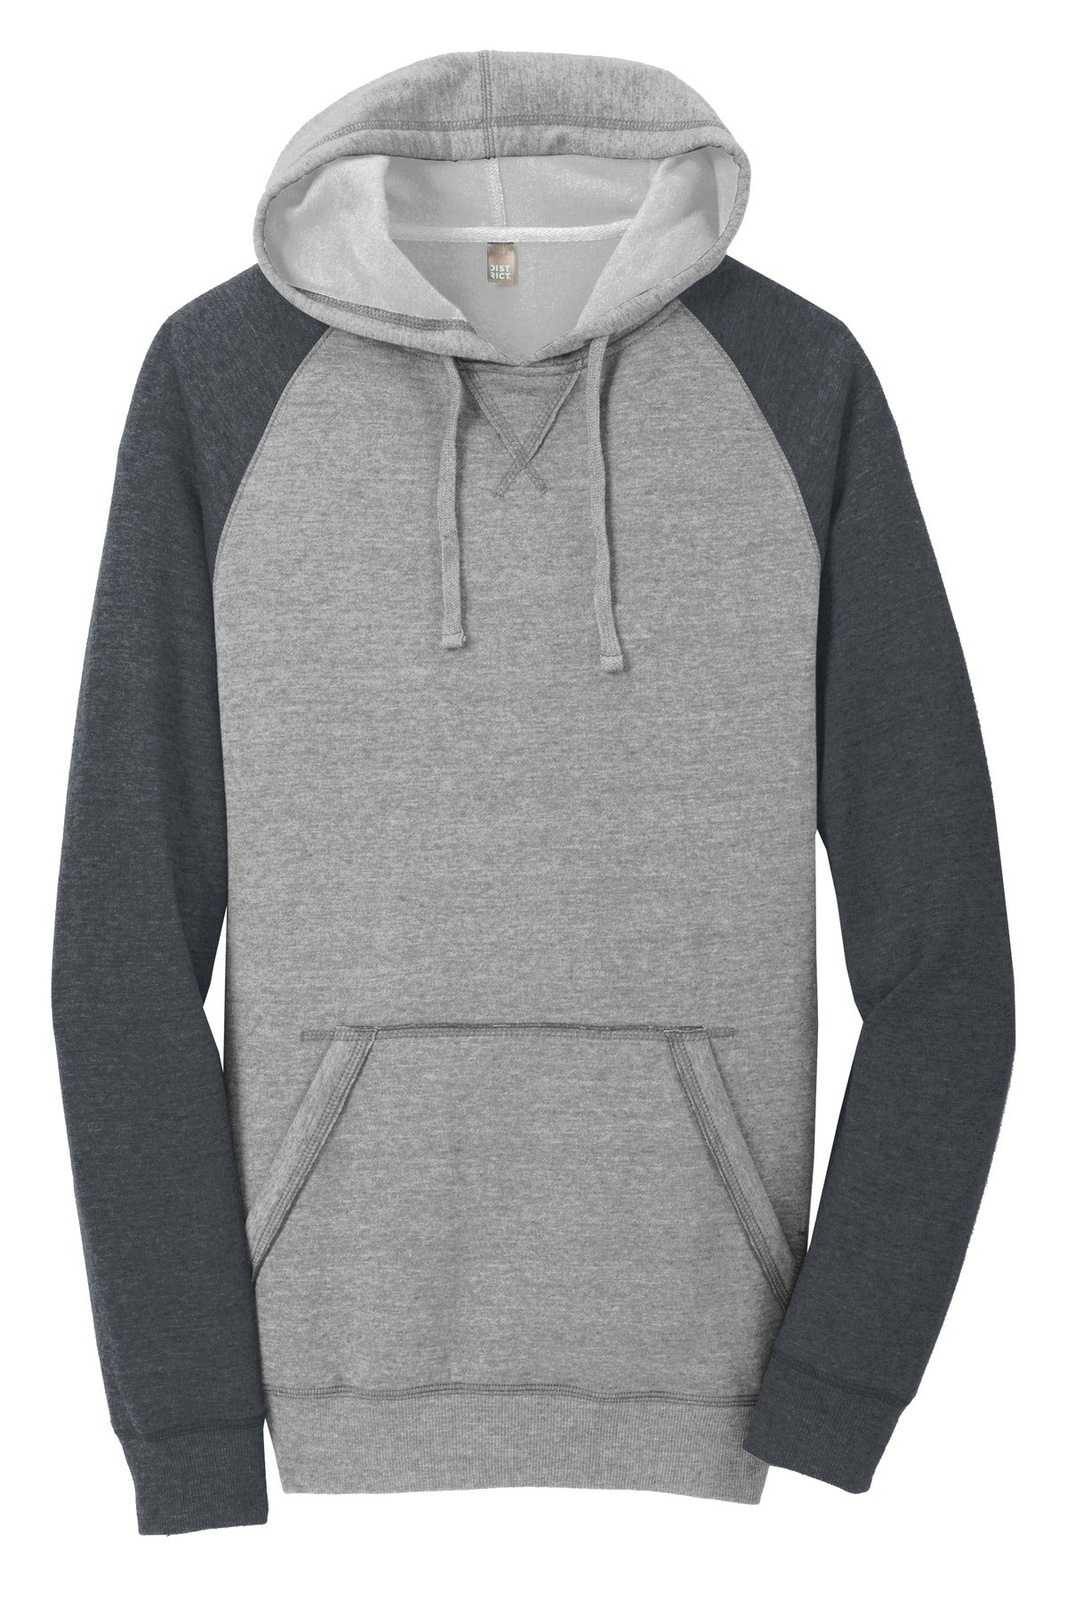 District DT196 Young Mens Lightweight Fleece Raglan Hoodie - Heathered Gray Heathered Charcoal - HIT a Double - 5